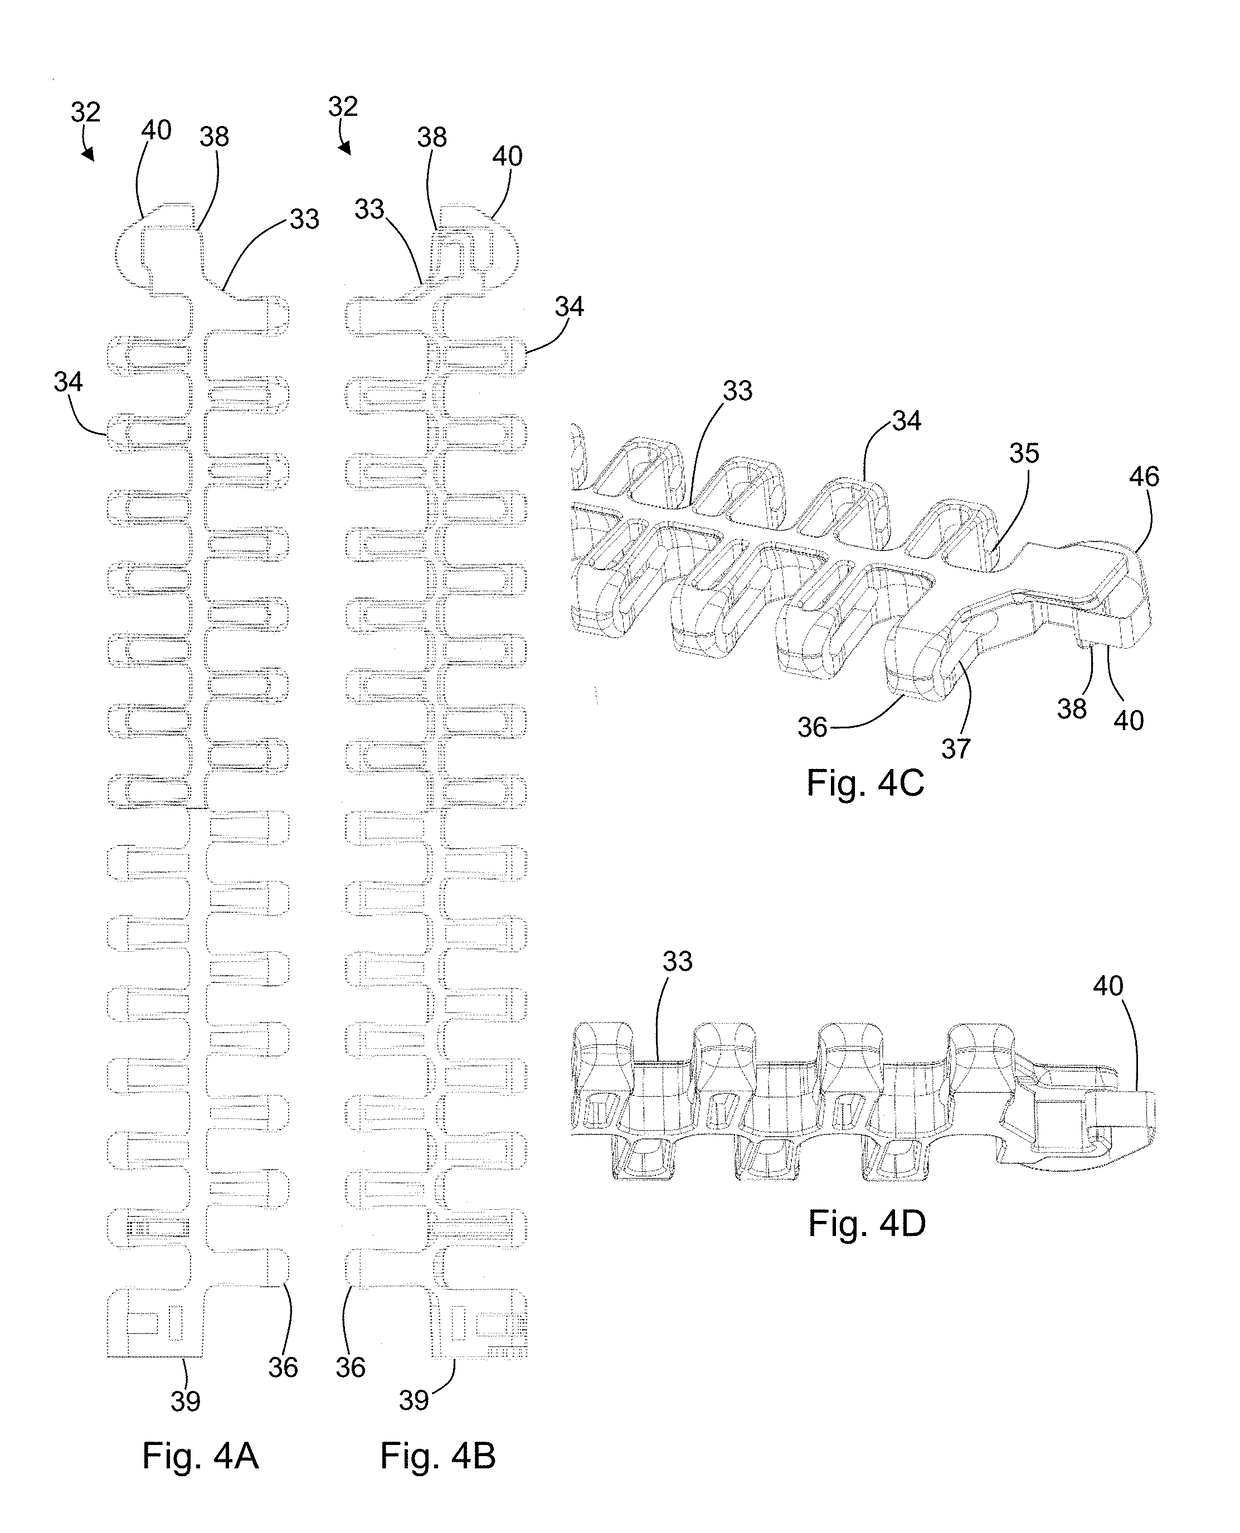 Positive Drive for a Spiral Conveyor and Belt Module for a Radius or Spiral Conveyor